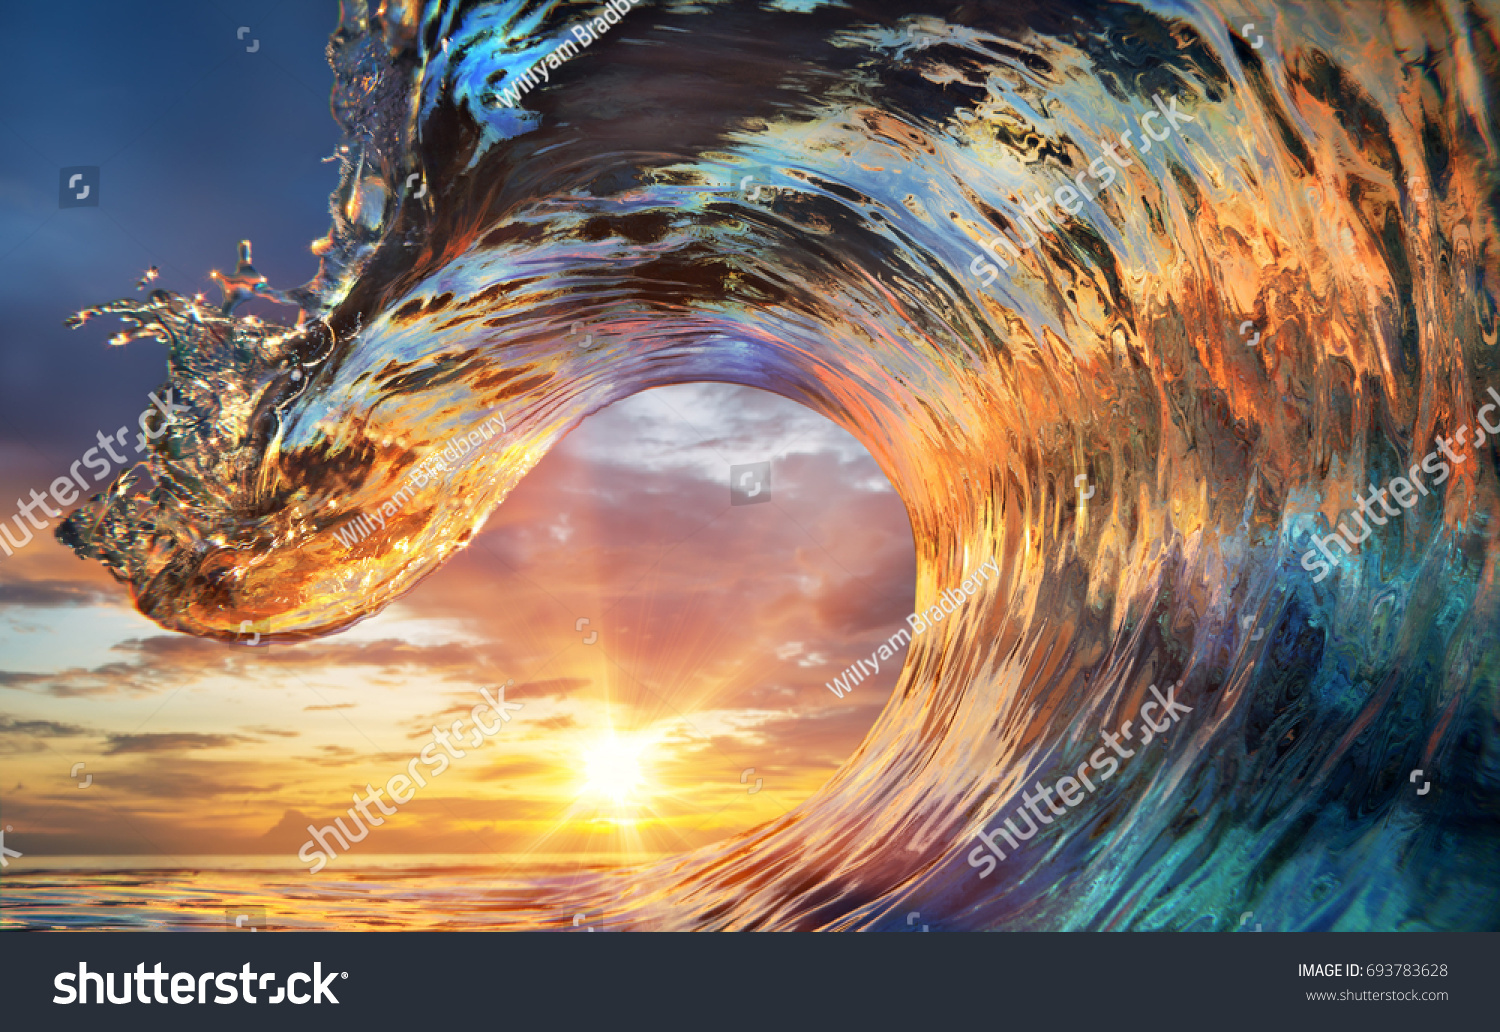 Colorful Ocean Wave. Sea water in crest shape. Sunset light and beautiful clouds on background #693783628